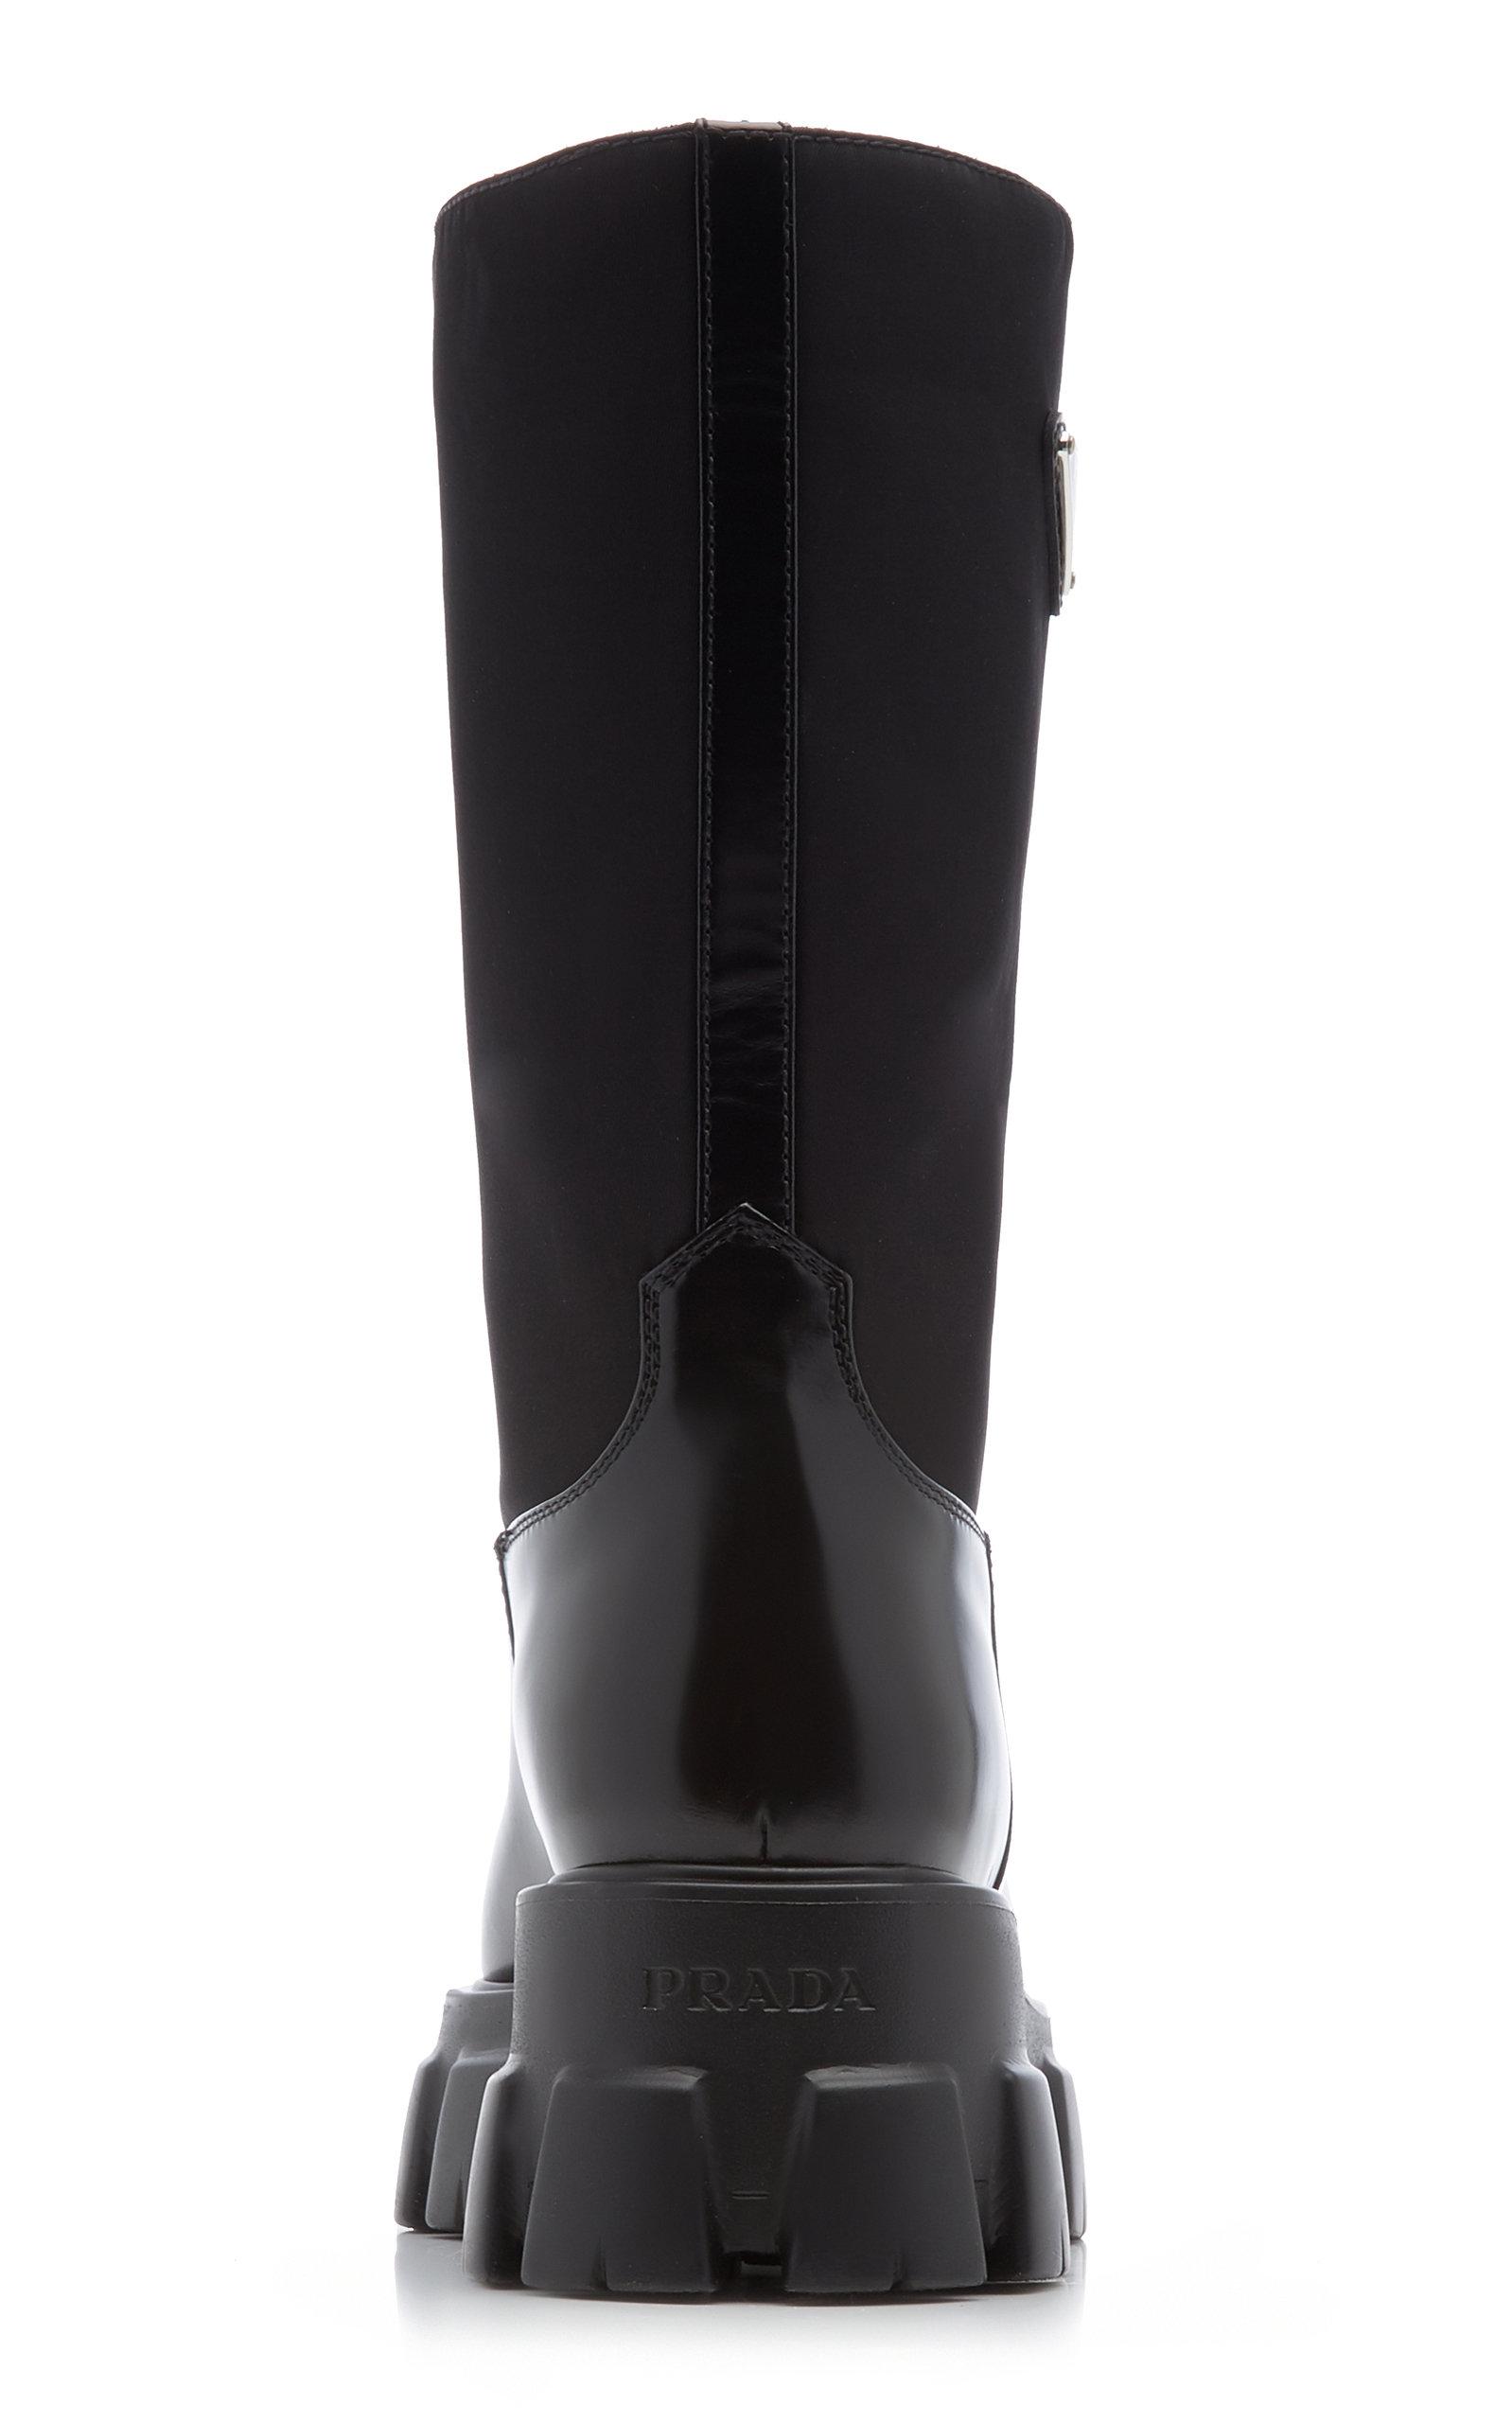 Prada Leather Boots in Black - Lyst